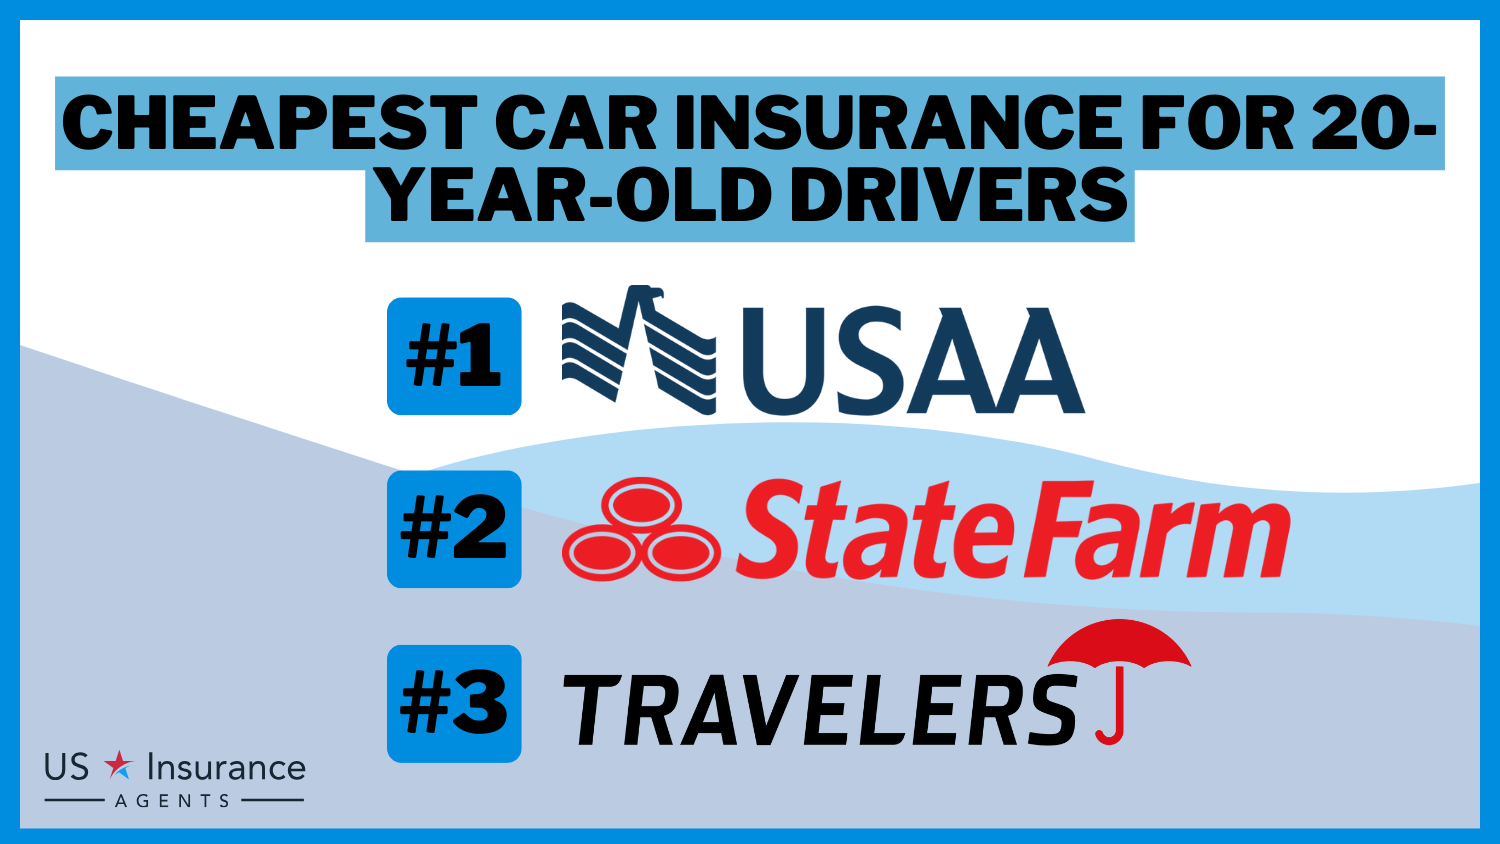 Cheapest Car Insurance for 20-Year-Old Drivers